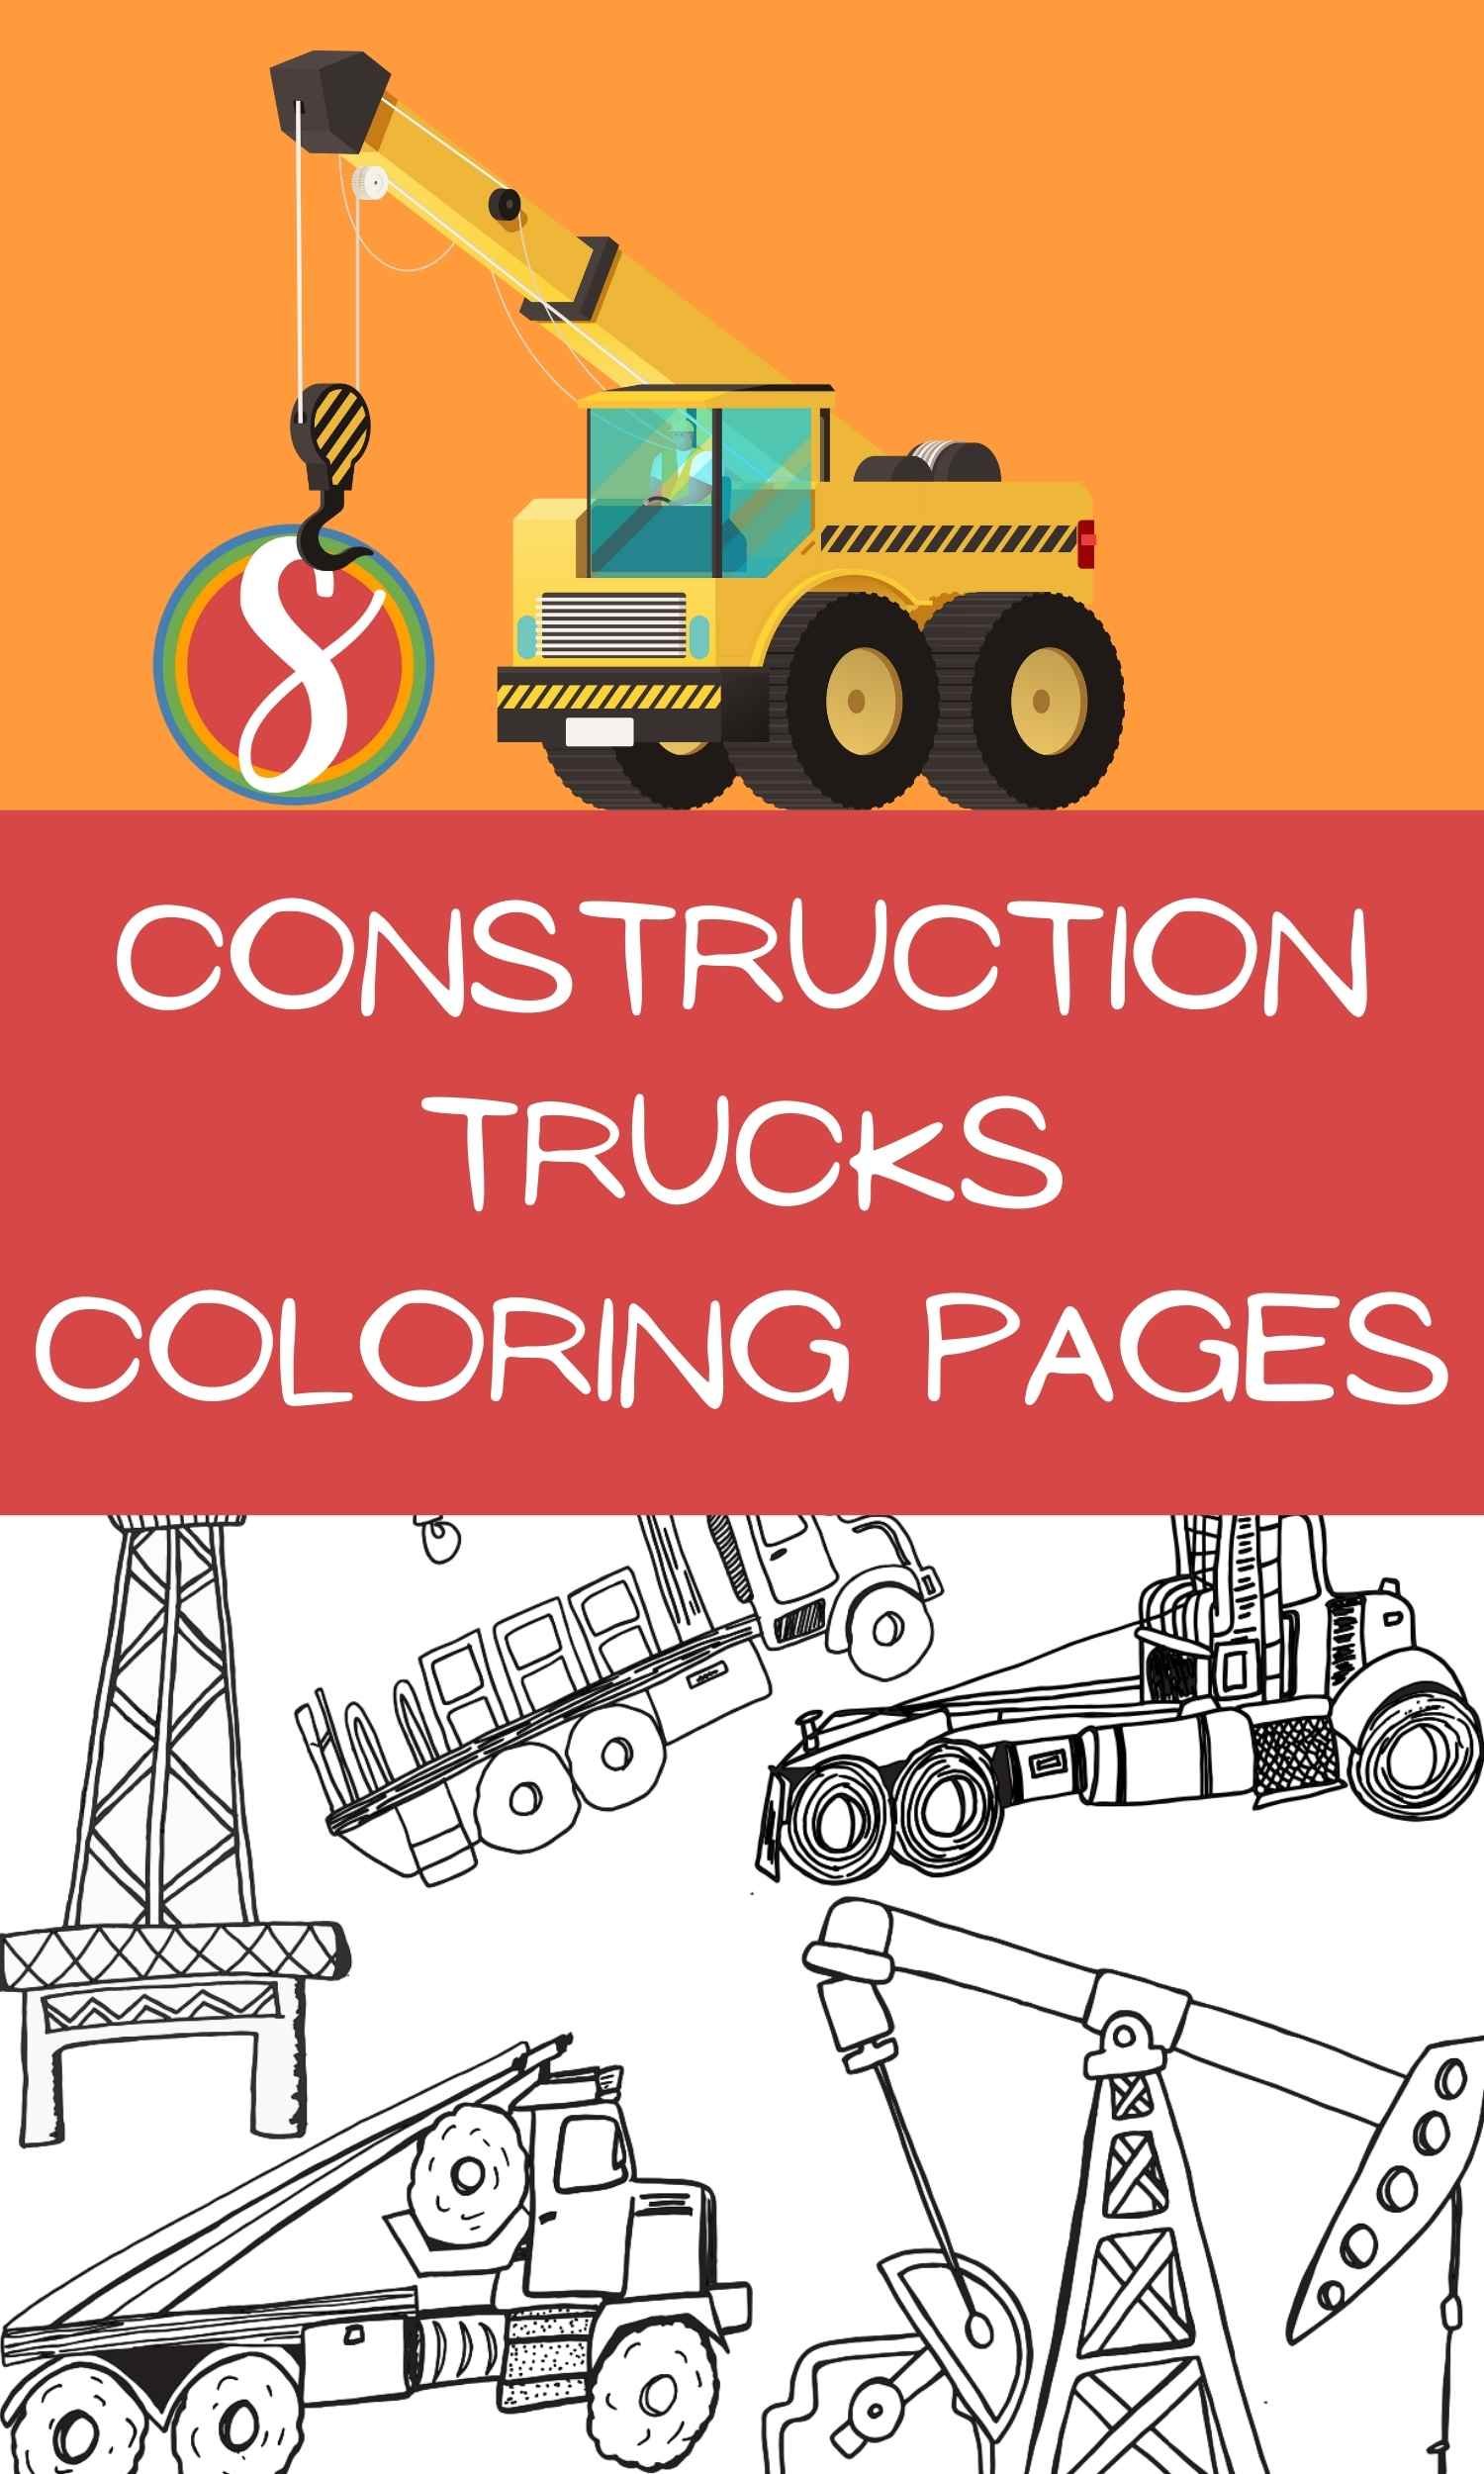 Trucks coloring pages with 3 construction trucks and an oil rig, the text "construction truck coloring pages" and an image of a crane truck on an orange background